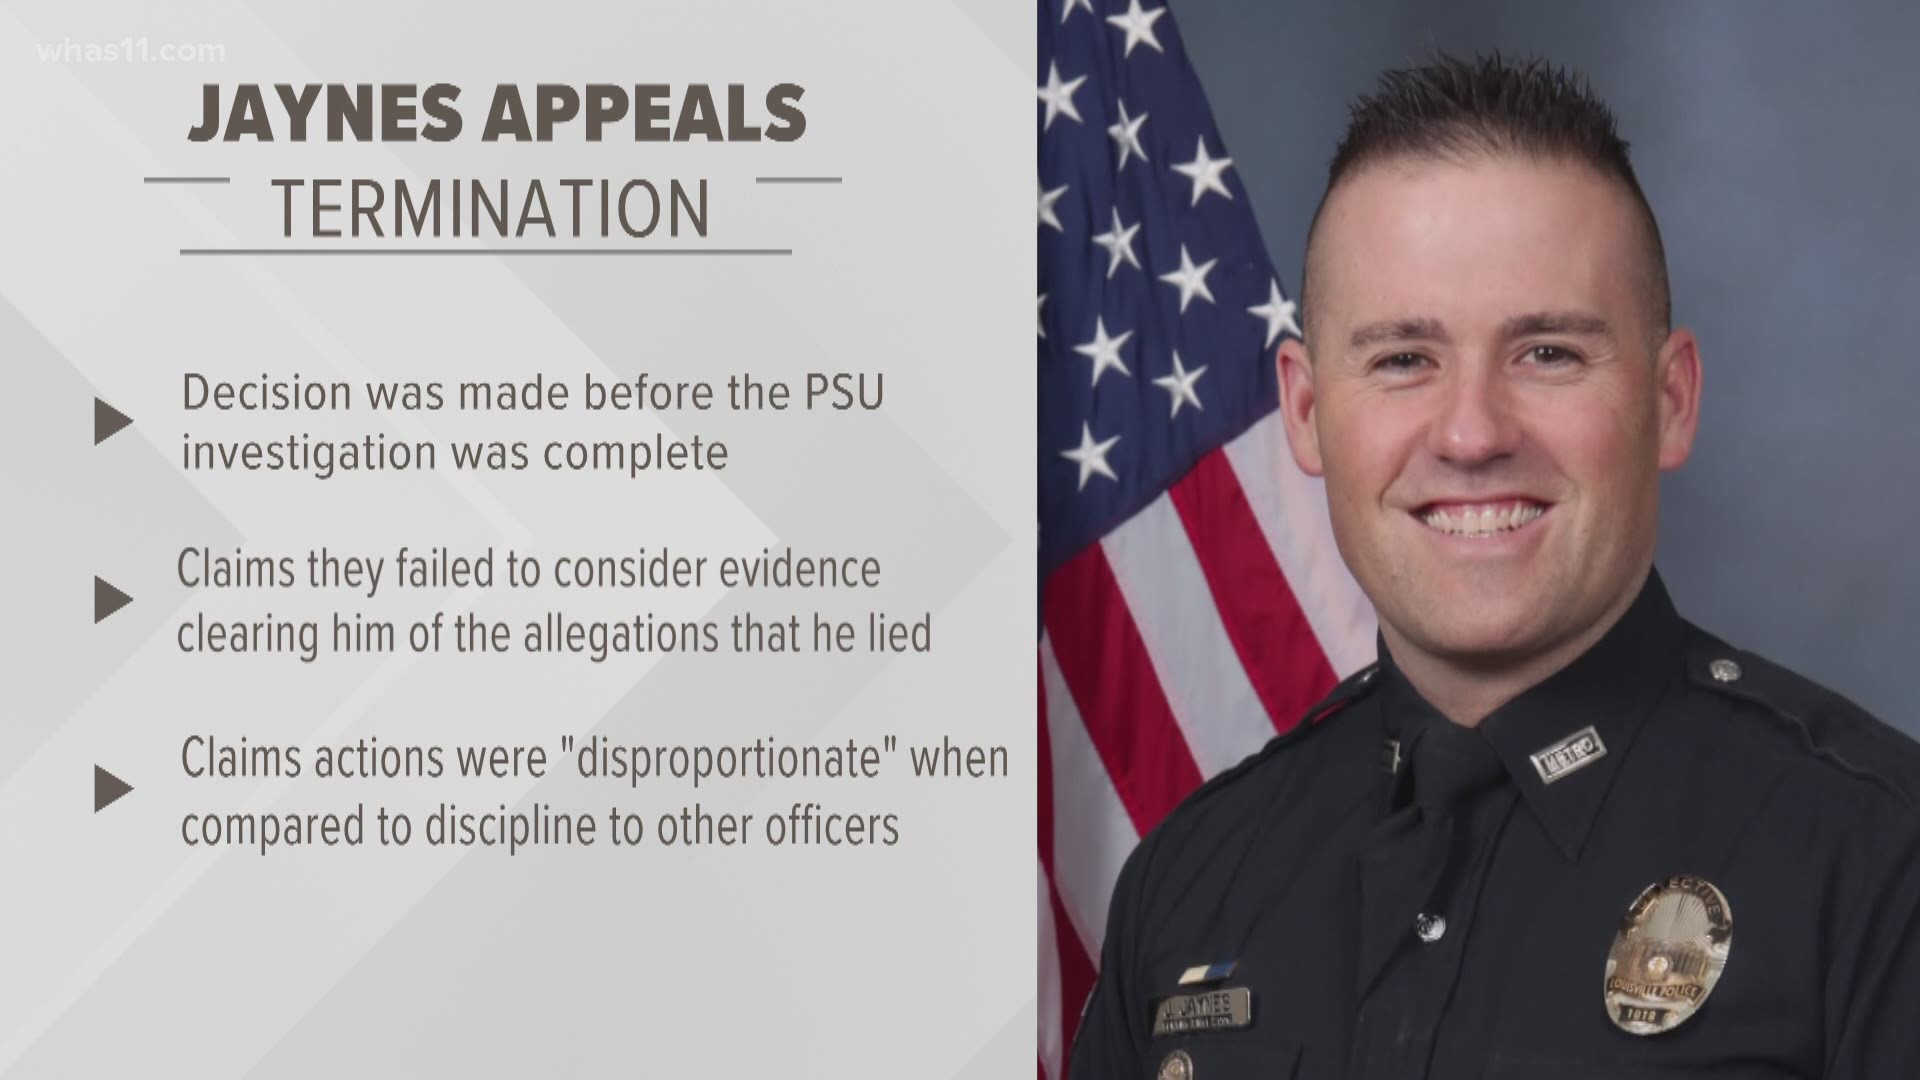 The appeal says Joshua Jaynes' firing was "disproportionate" when compares to discipline issued to other officers for similar actions.